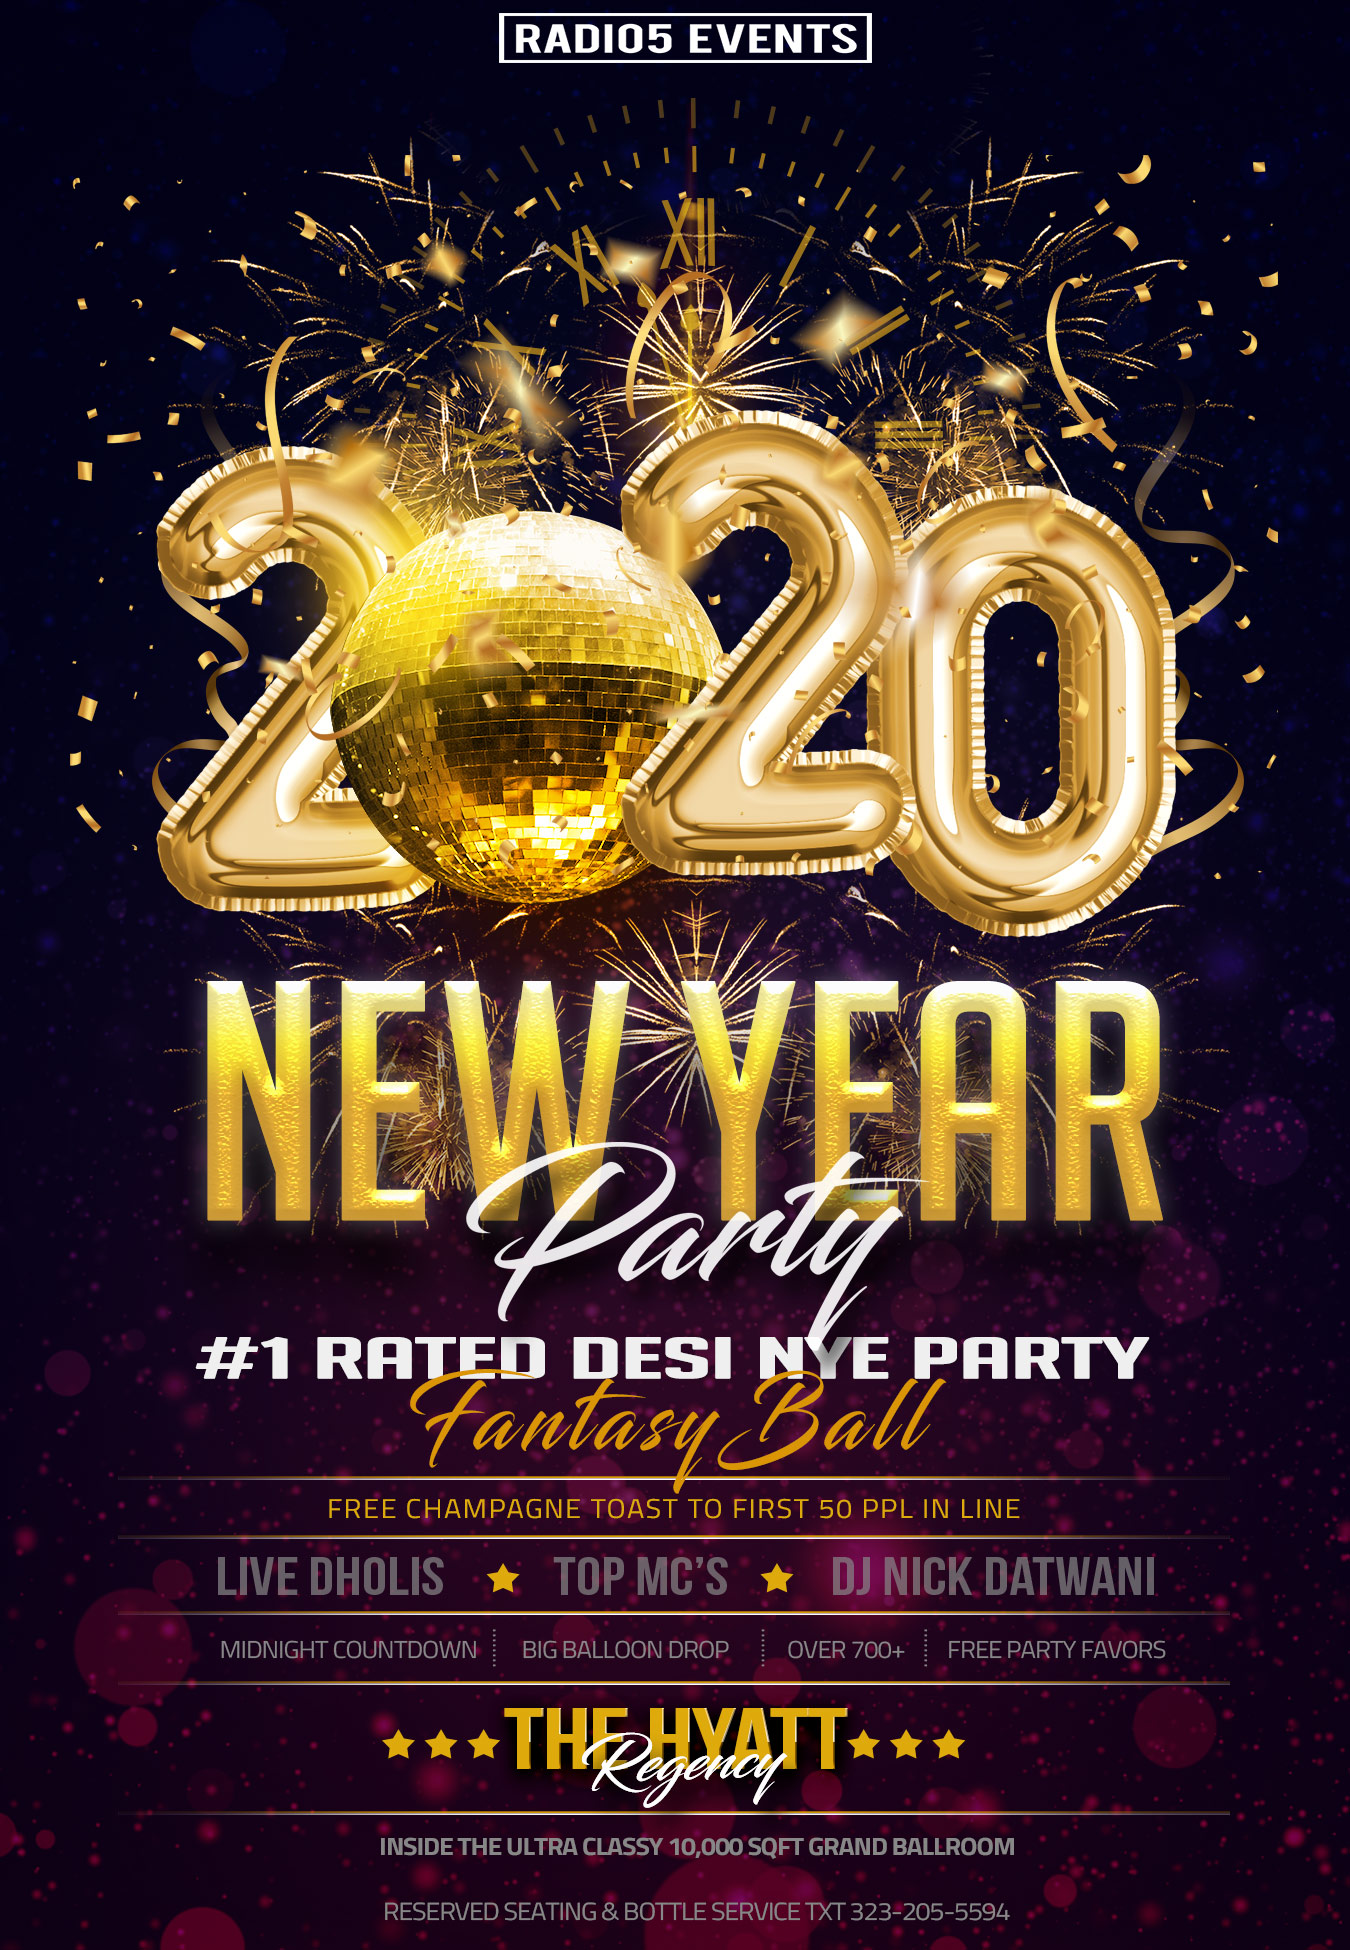 Radio5 Events presents the #1 Rated Desi NYE Party in LA! New Years Eve 2020 @ the Hyatt Regency! 14th Annual Fantasy Ball. Celebrate New Years with Charm & Sophistication w/ Mumbai's DJ Nyk. Free Party Favors & more!